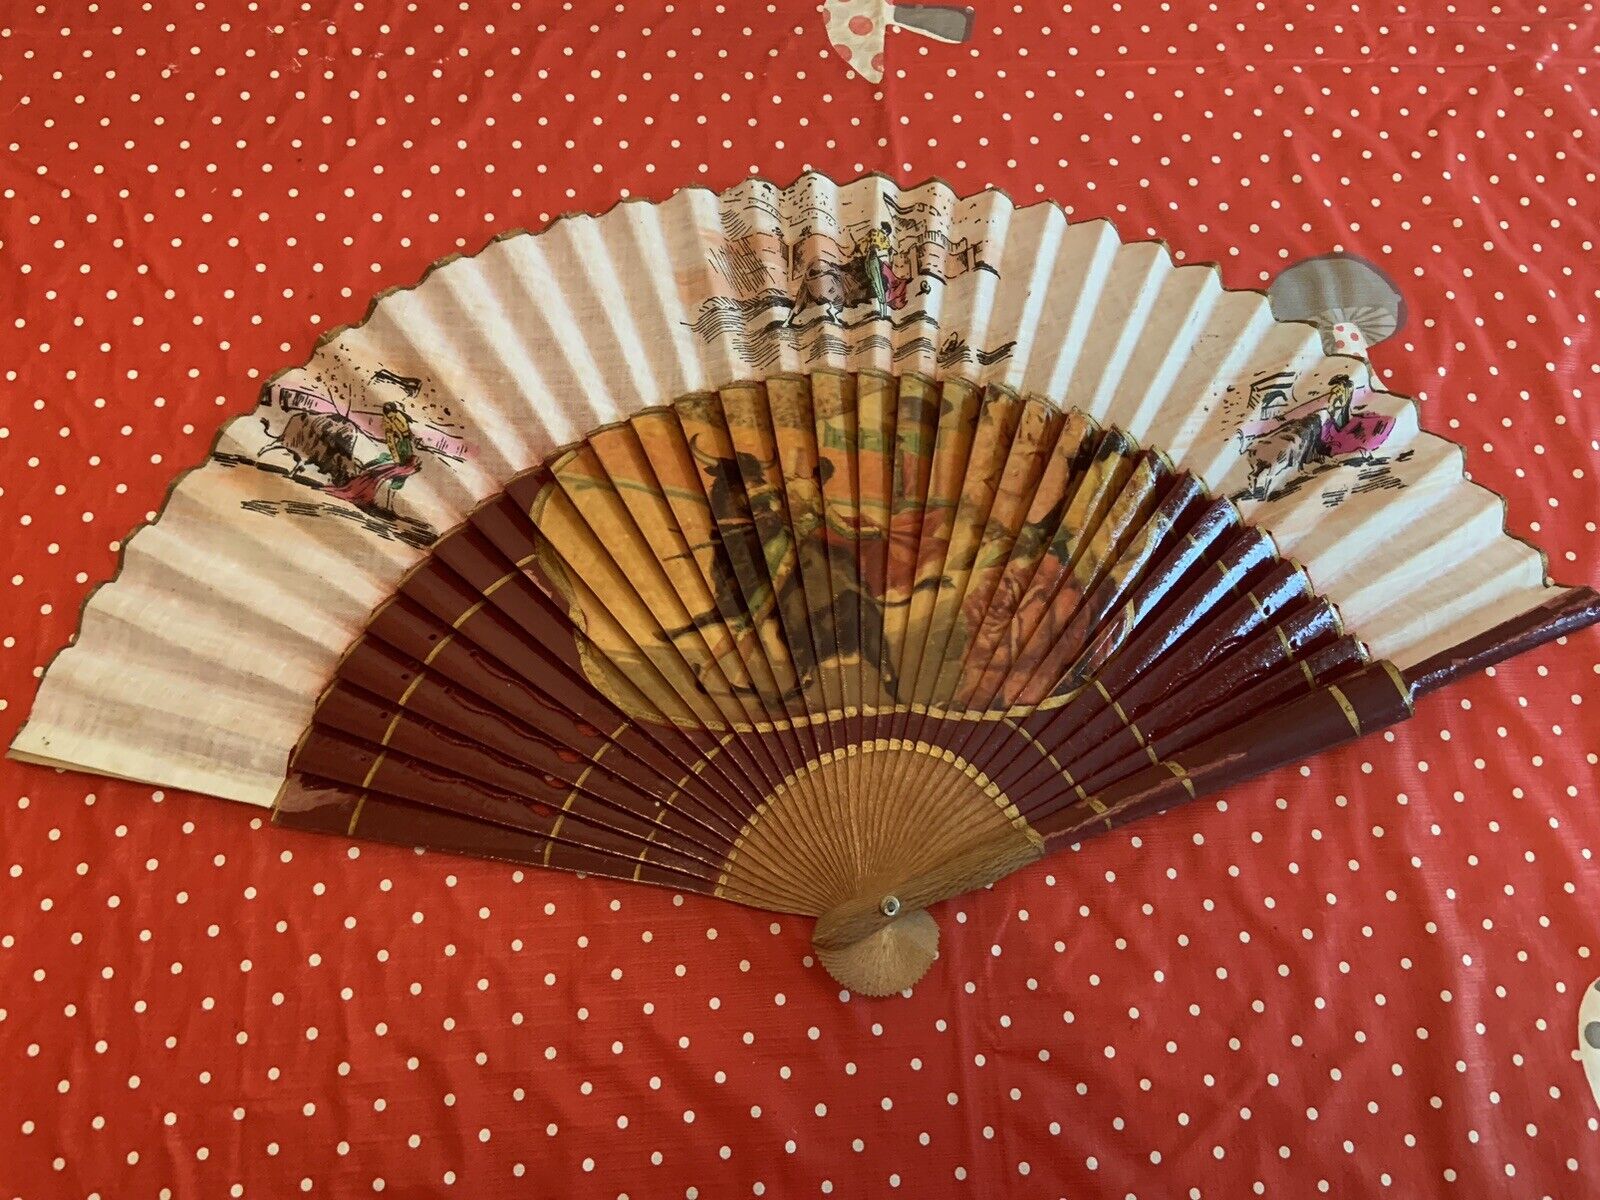 Vintage Asian Hand Fan 16” Wood & Fabric Hand Painted Bull Fighting Scene